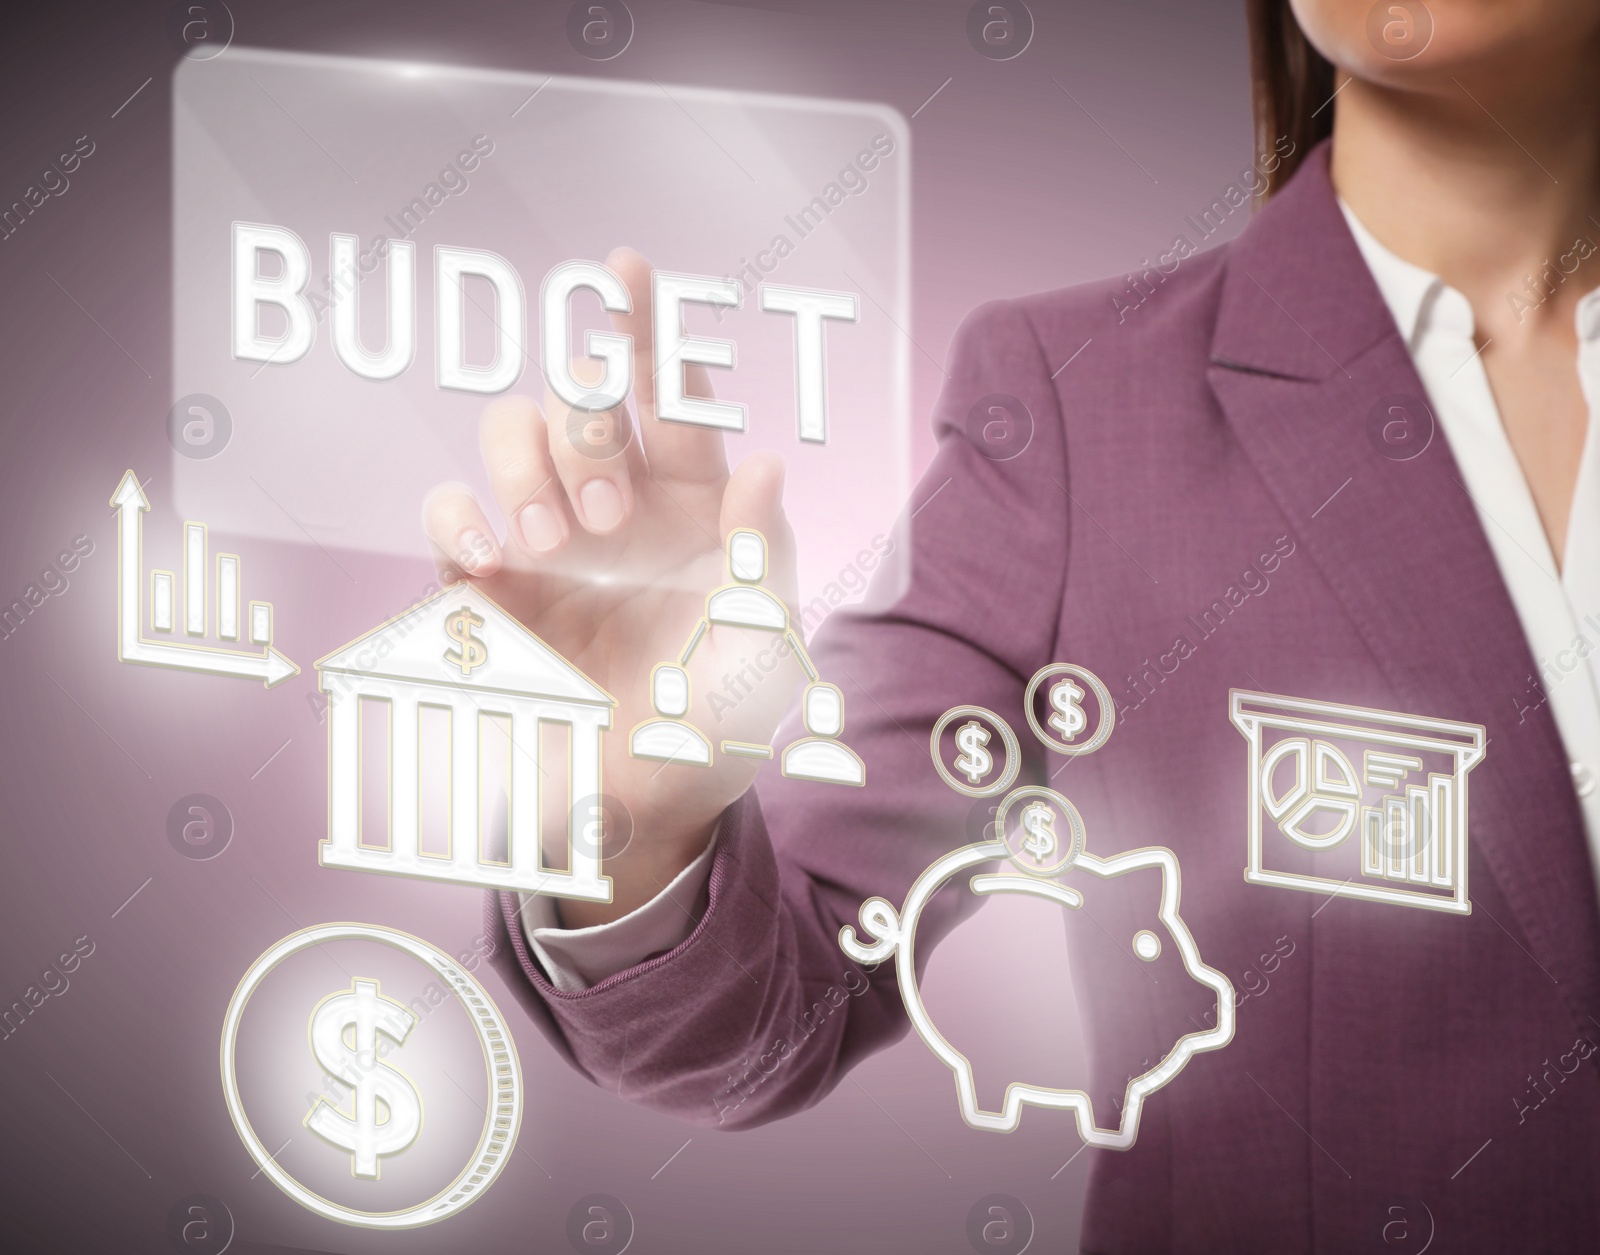 Image of Budget management. Businesswoman using virtual screen with financial icons, closeup